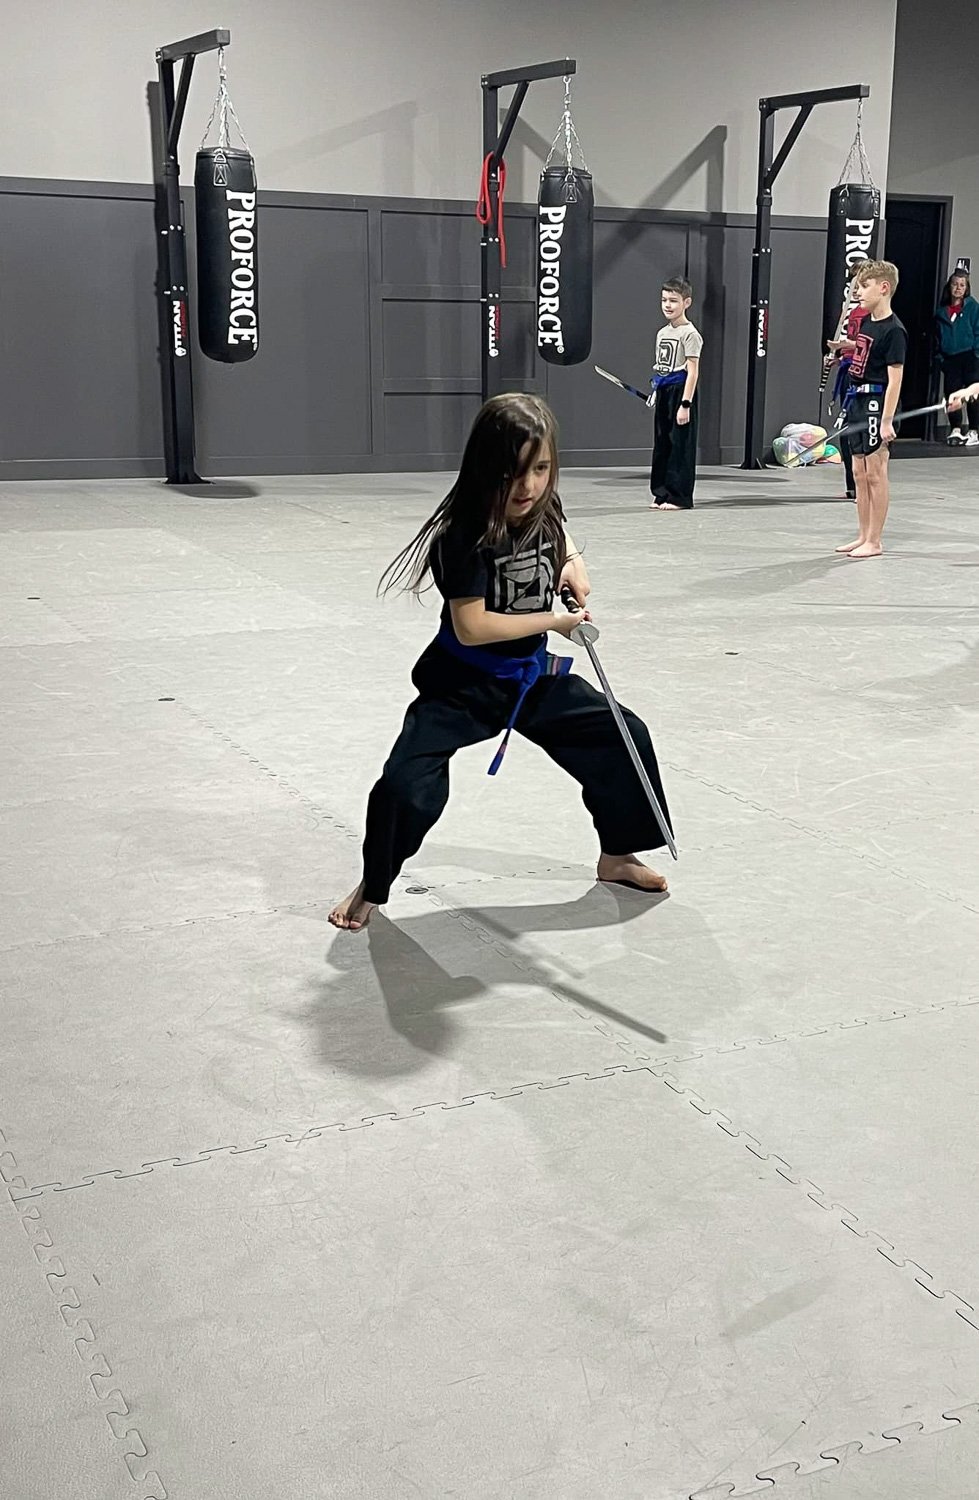 A young girl in martial arts outfit wielding a sword inside a gymnasium  